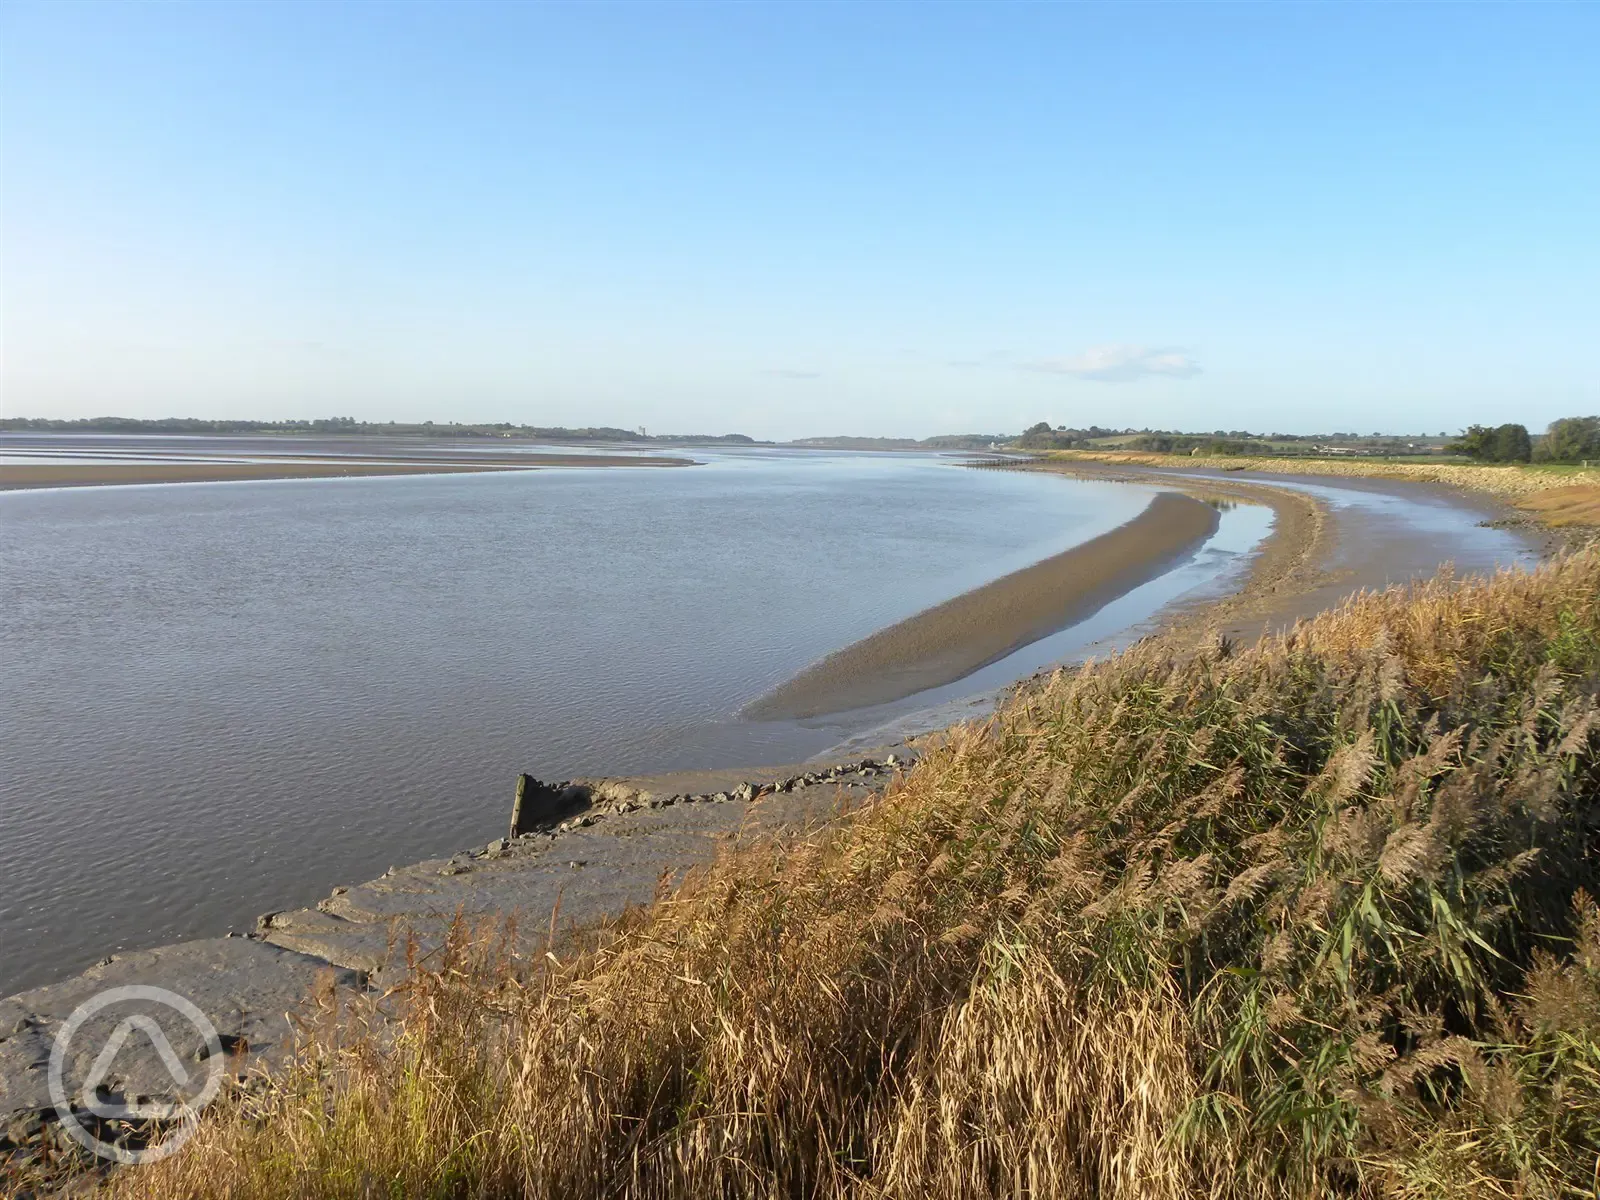 View towards the Severn Bridges at low tide